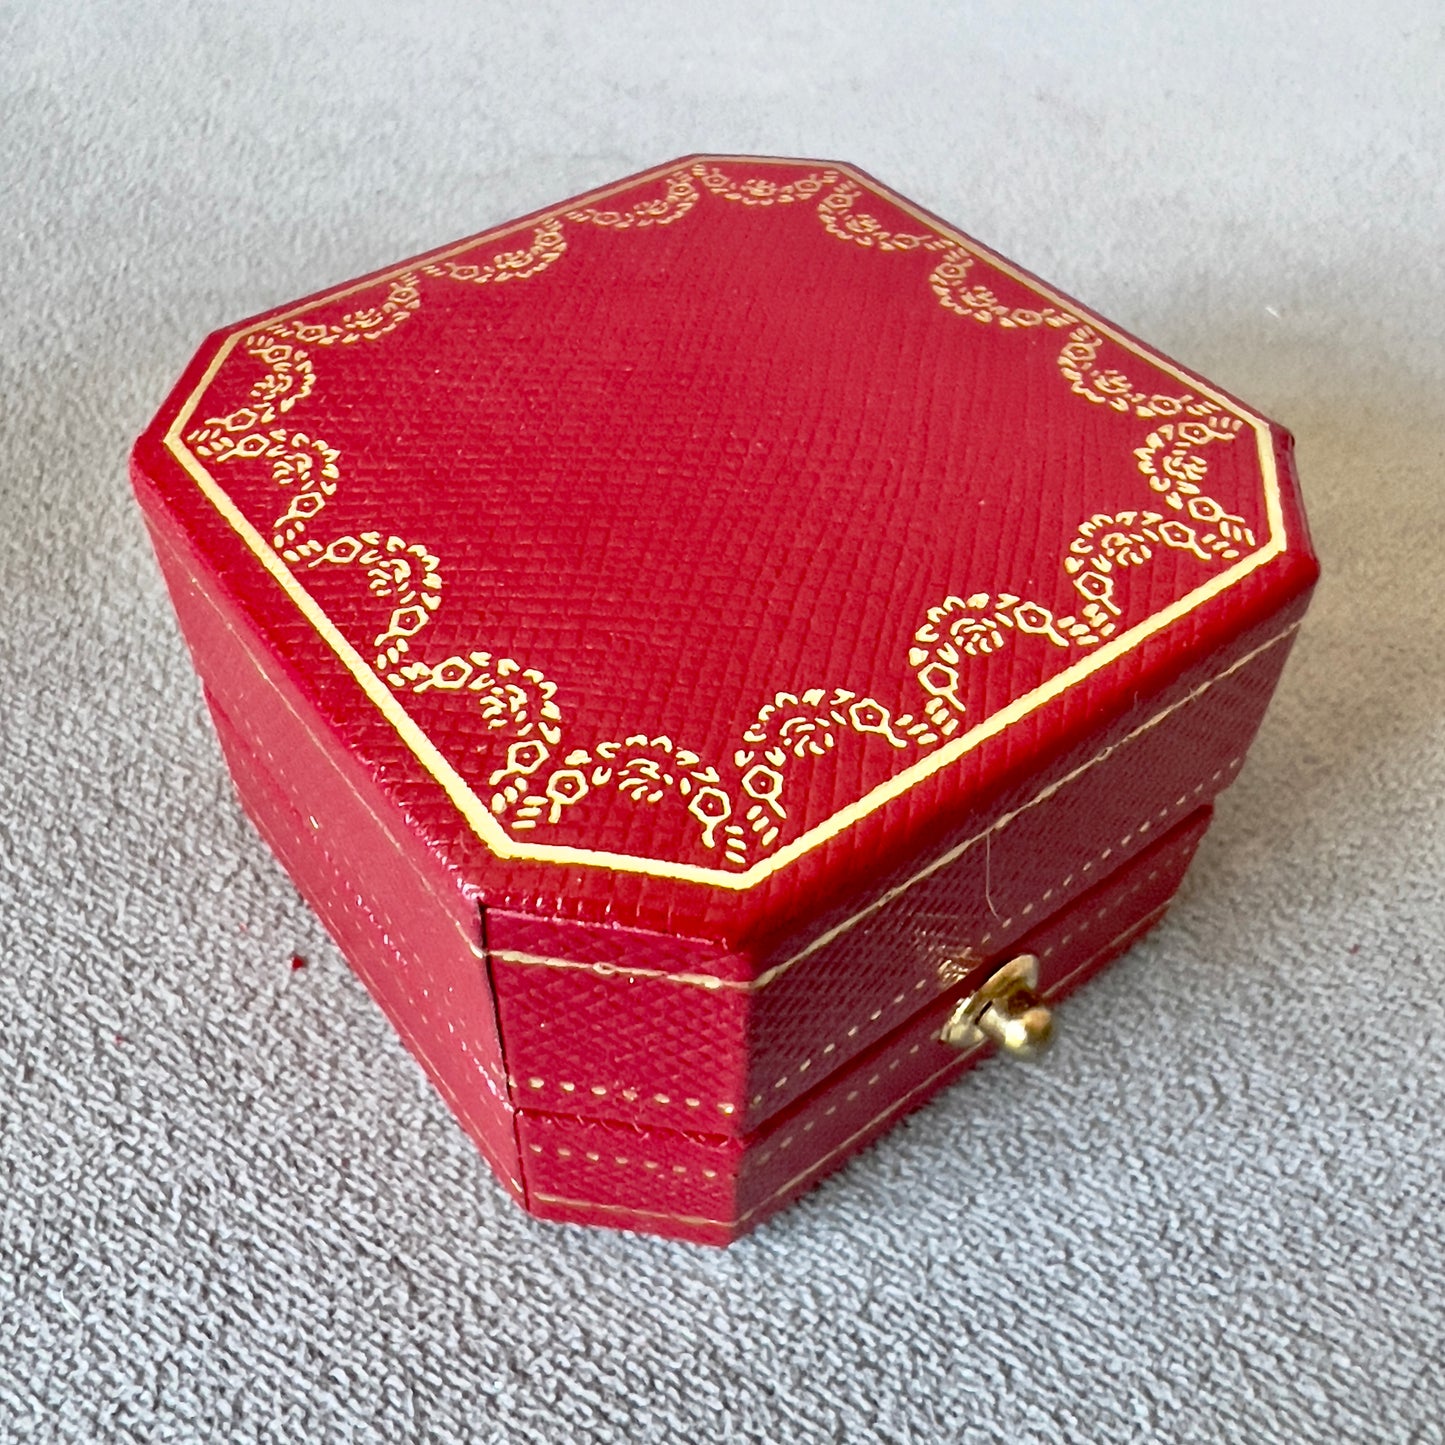 CARTIER Ring Box + Outer Box 2.60x2.10x1.30 inches